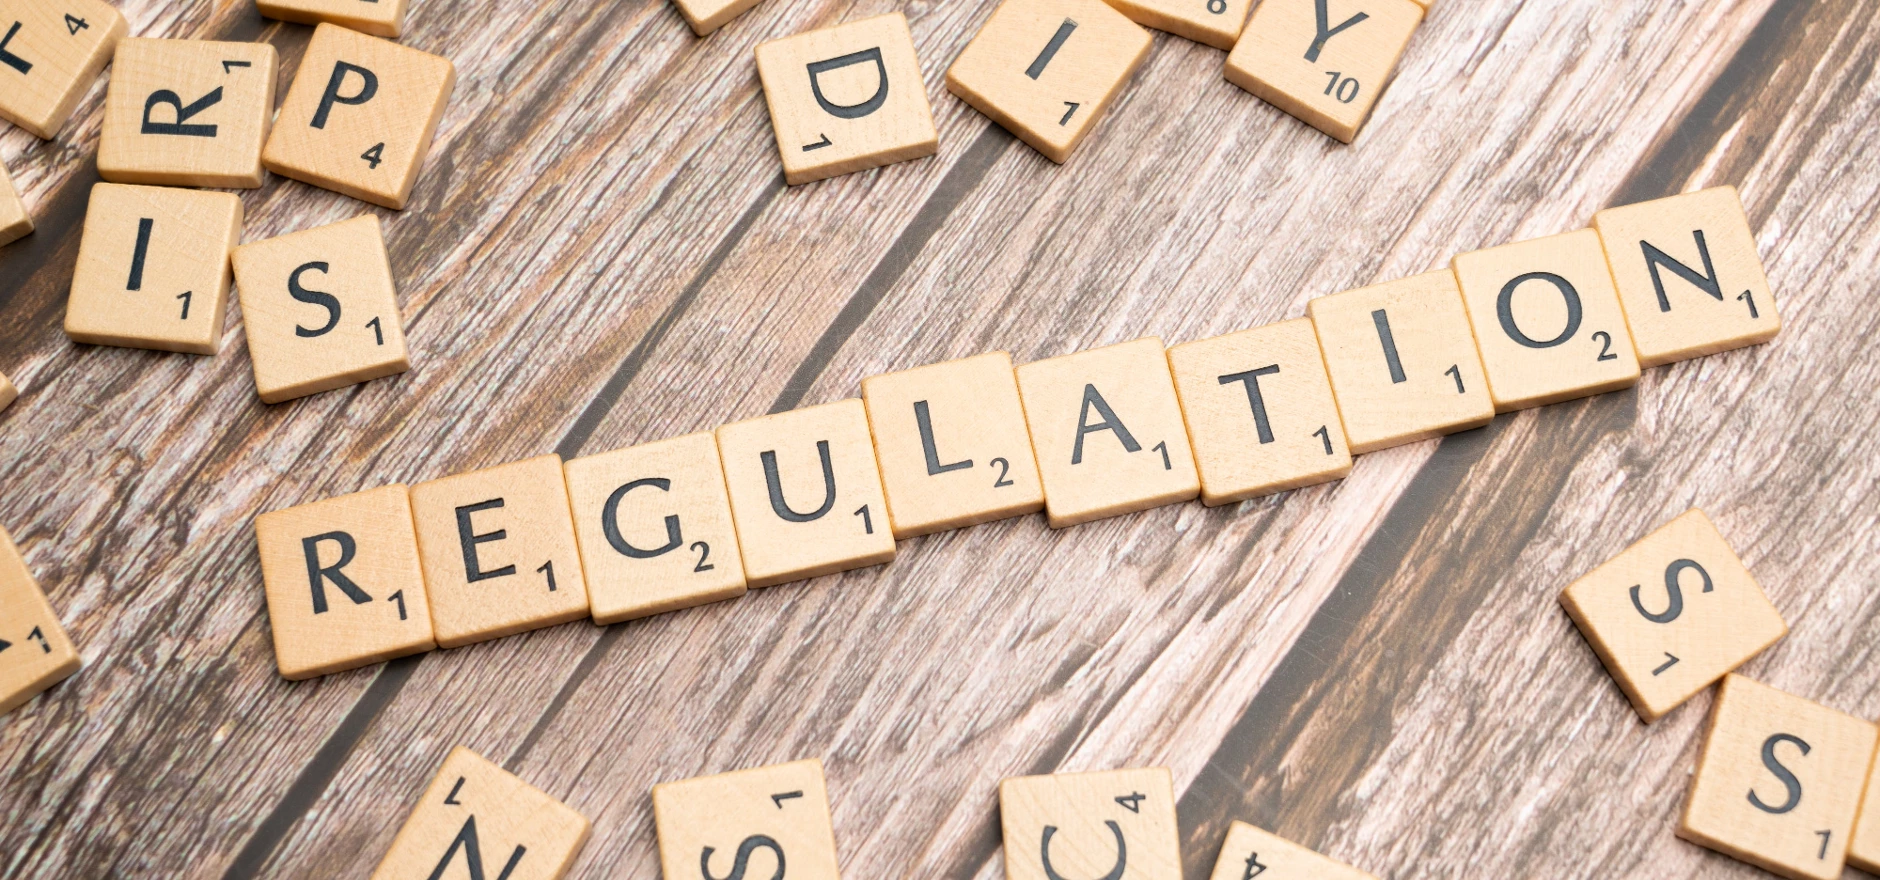 Scrabble letters spelling the word regulation